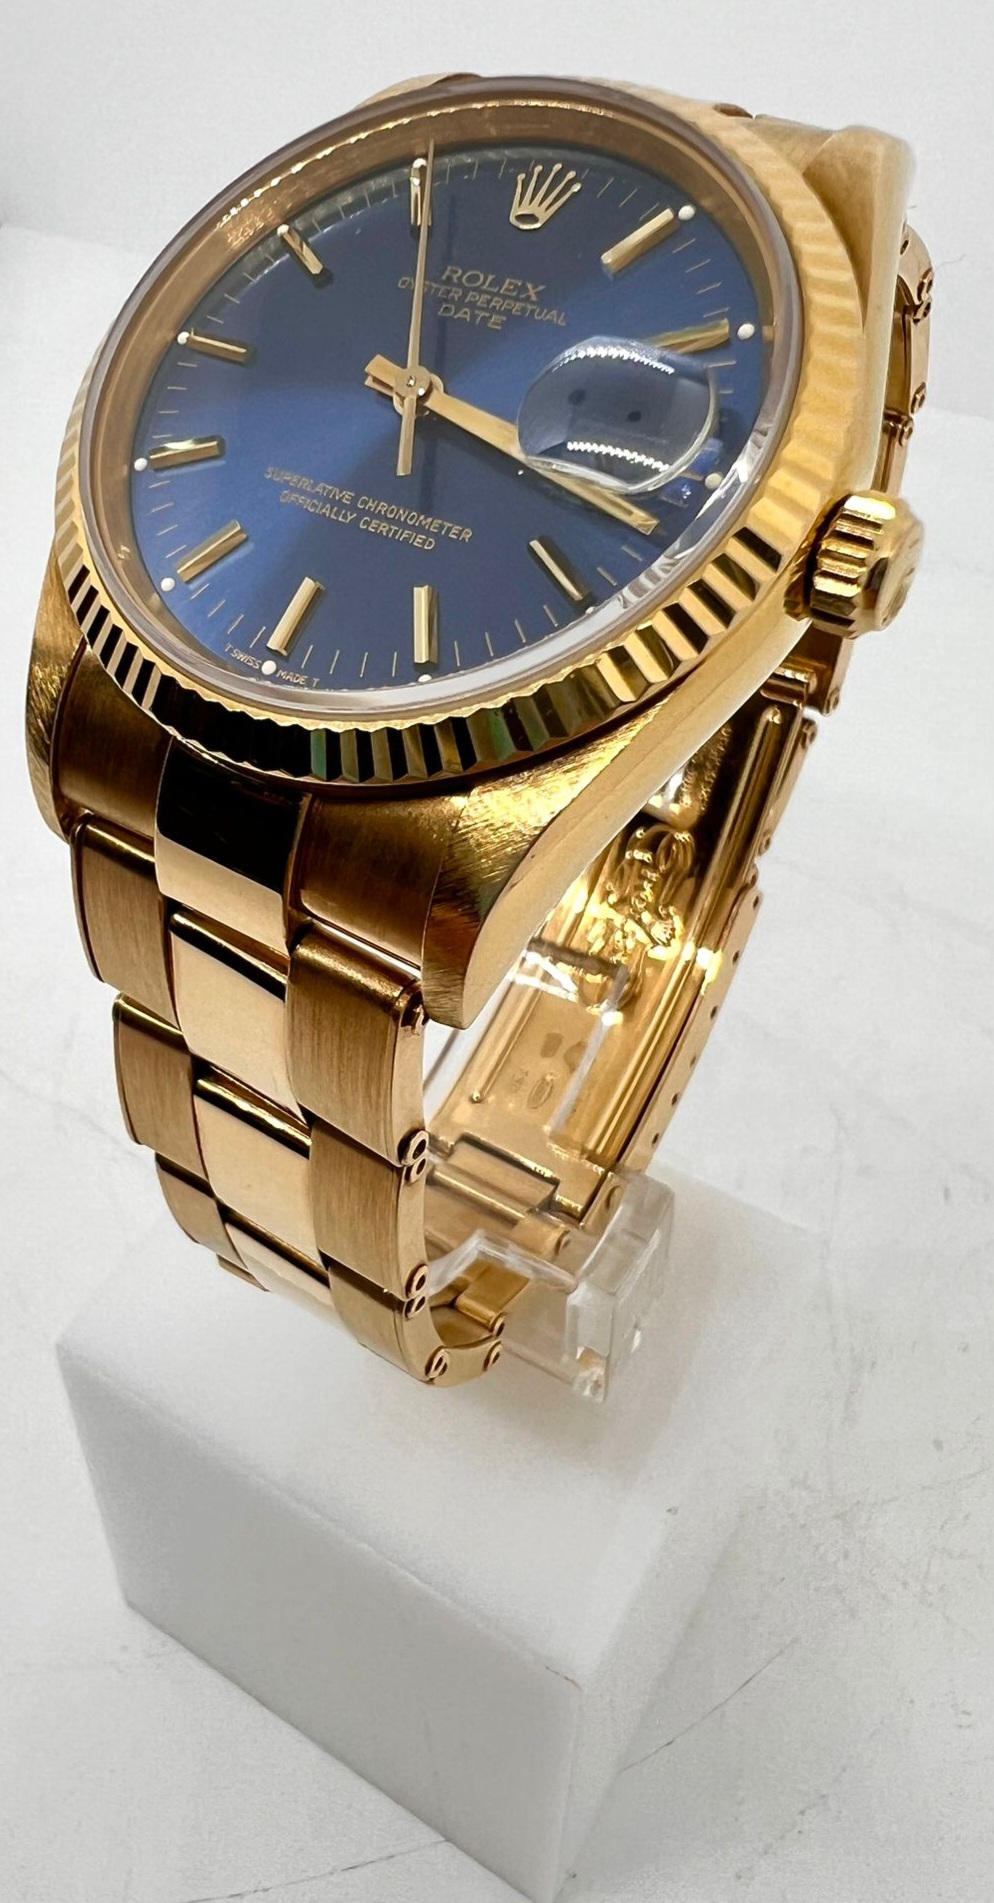 Rolex Oyster Perpetual Date Oyster Perpetual Date 15238 Yellow Gold Blu Dial Bracelet Full Set 1997